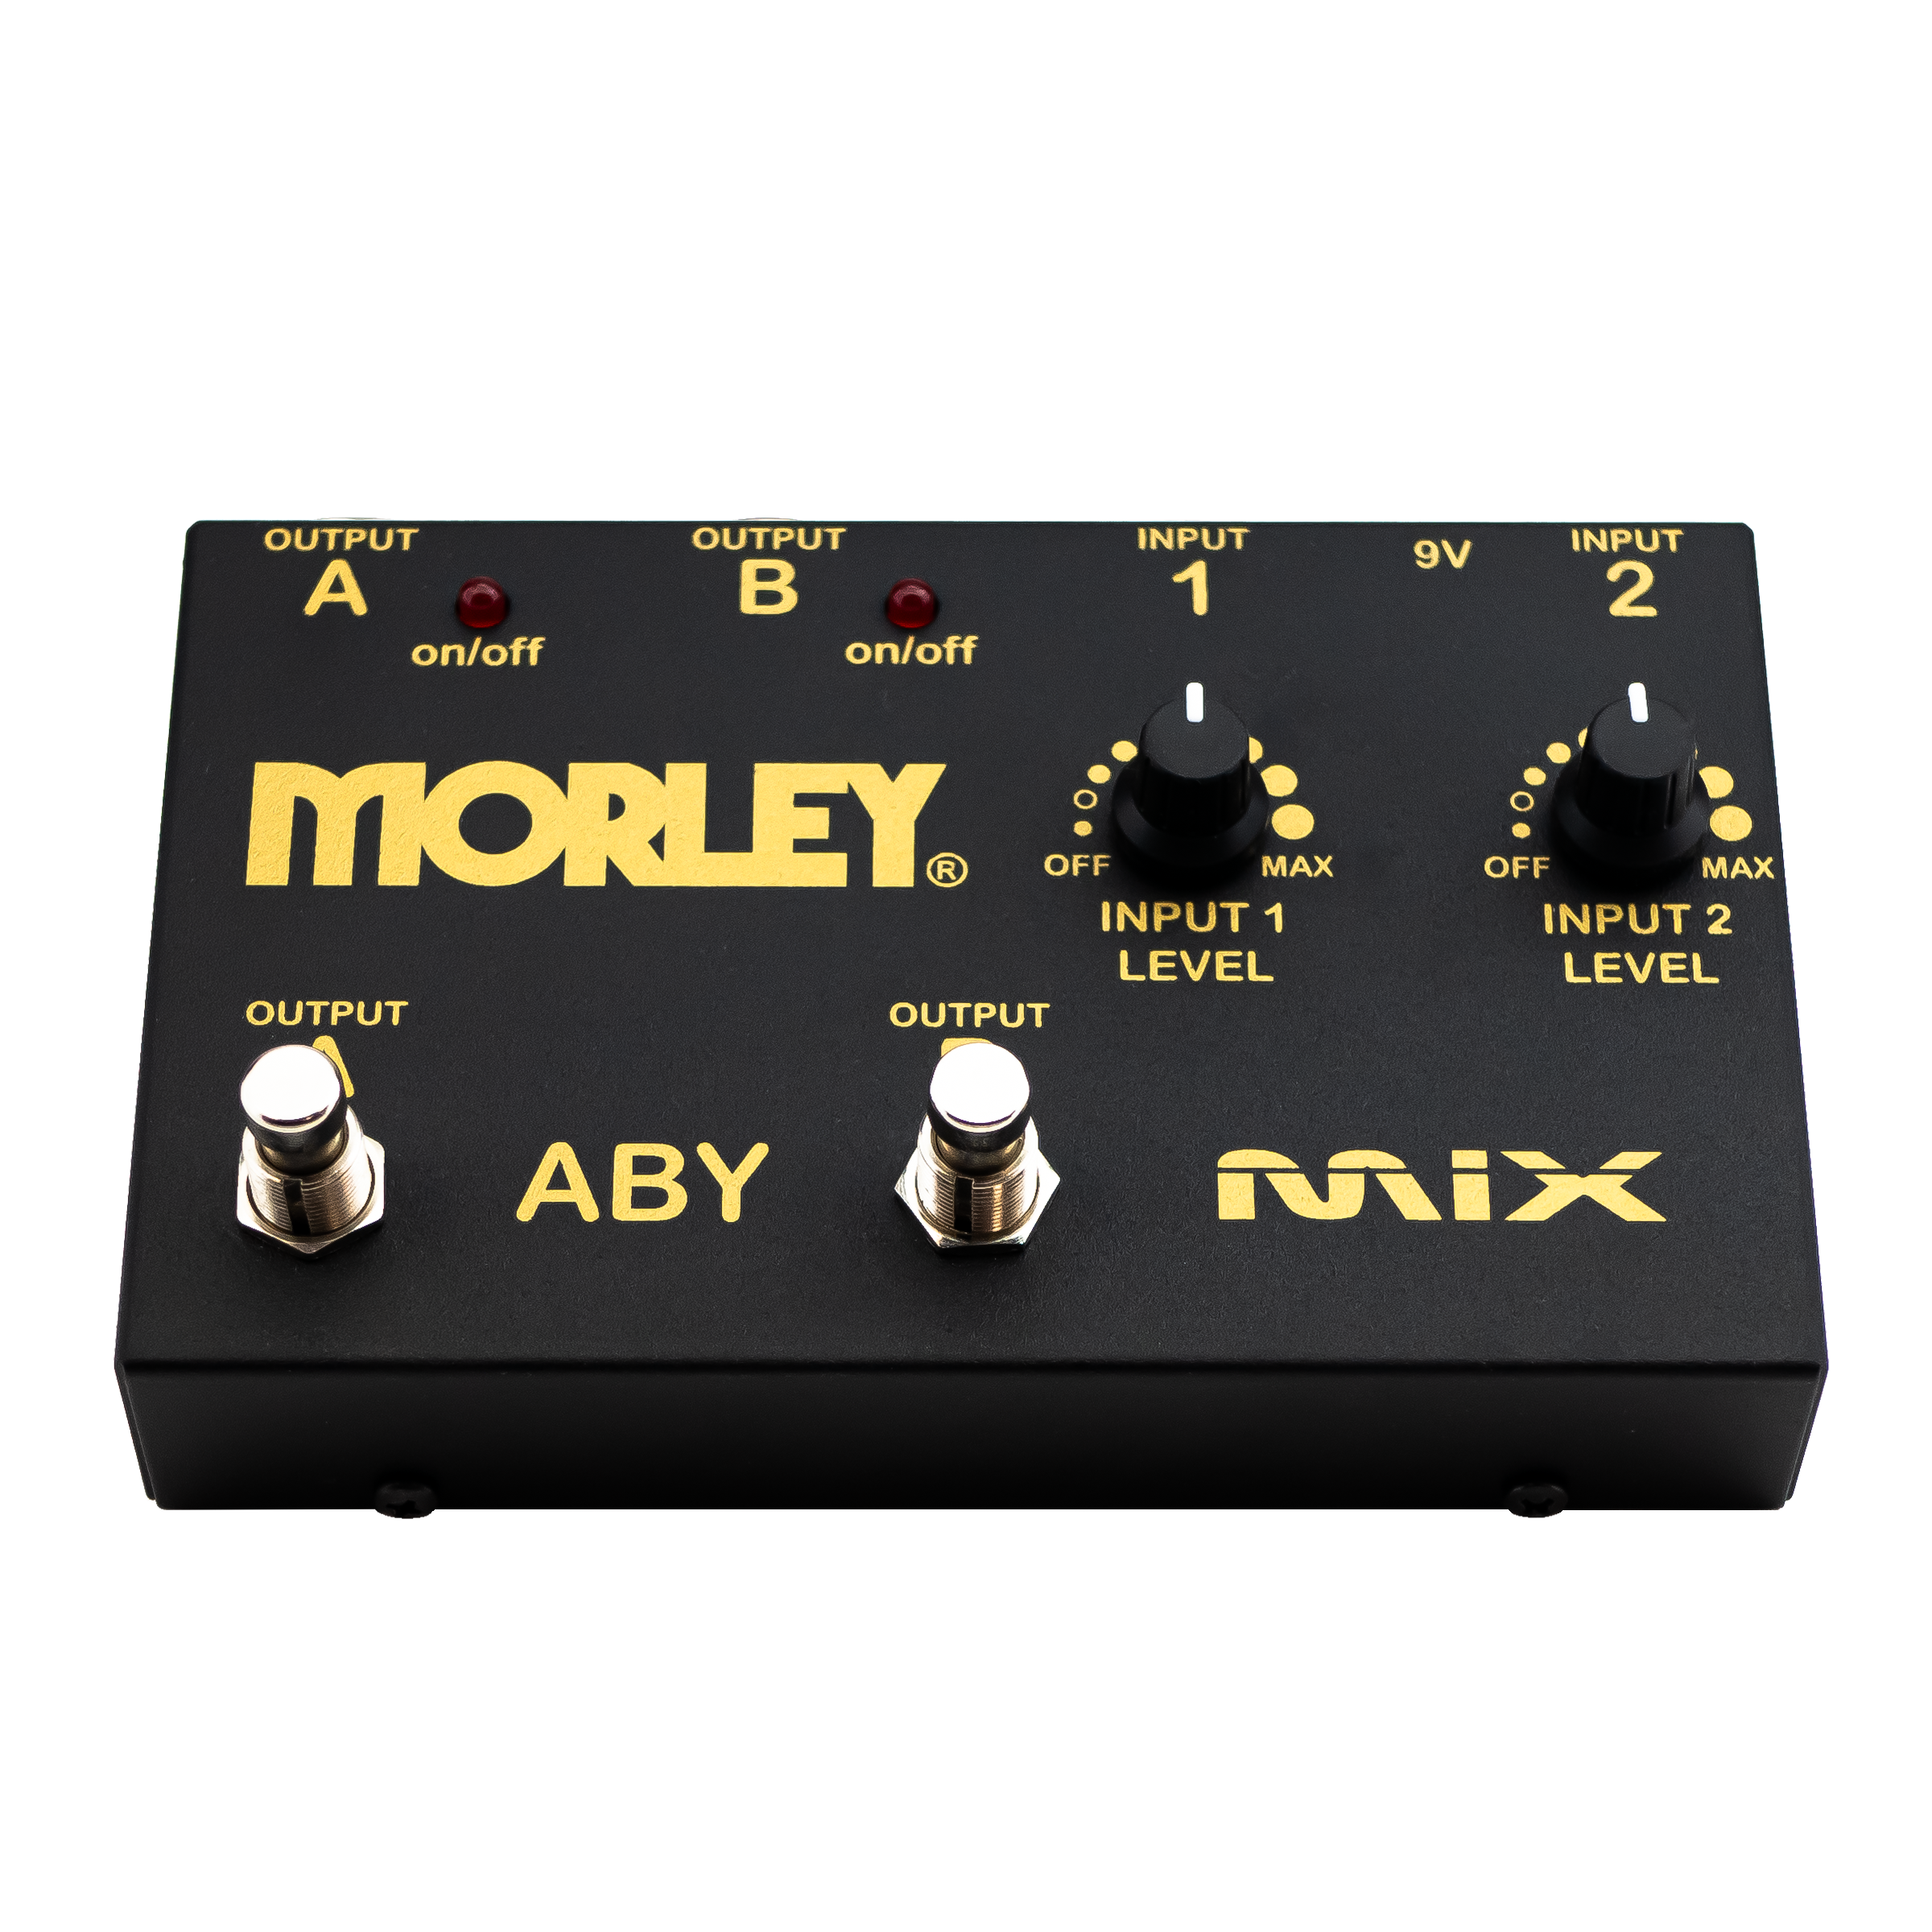 Morley ABY Mix Gold Series Mixer/Combiner